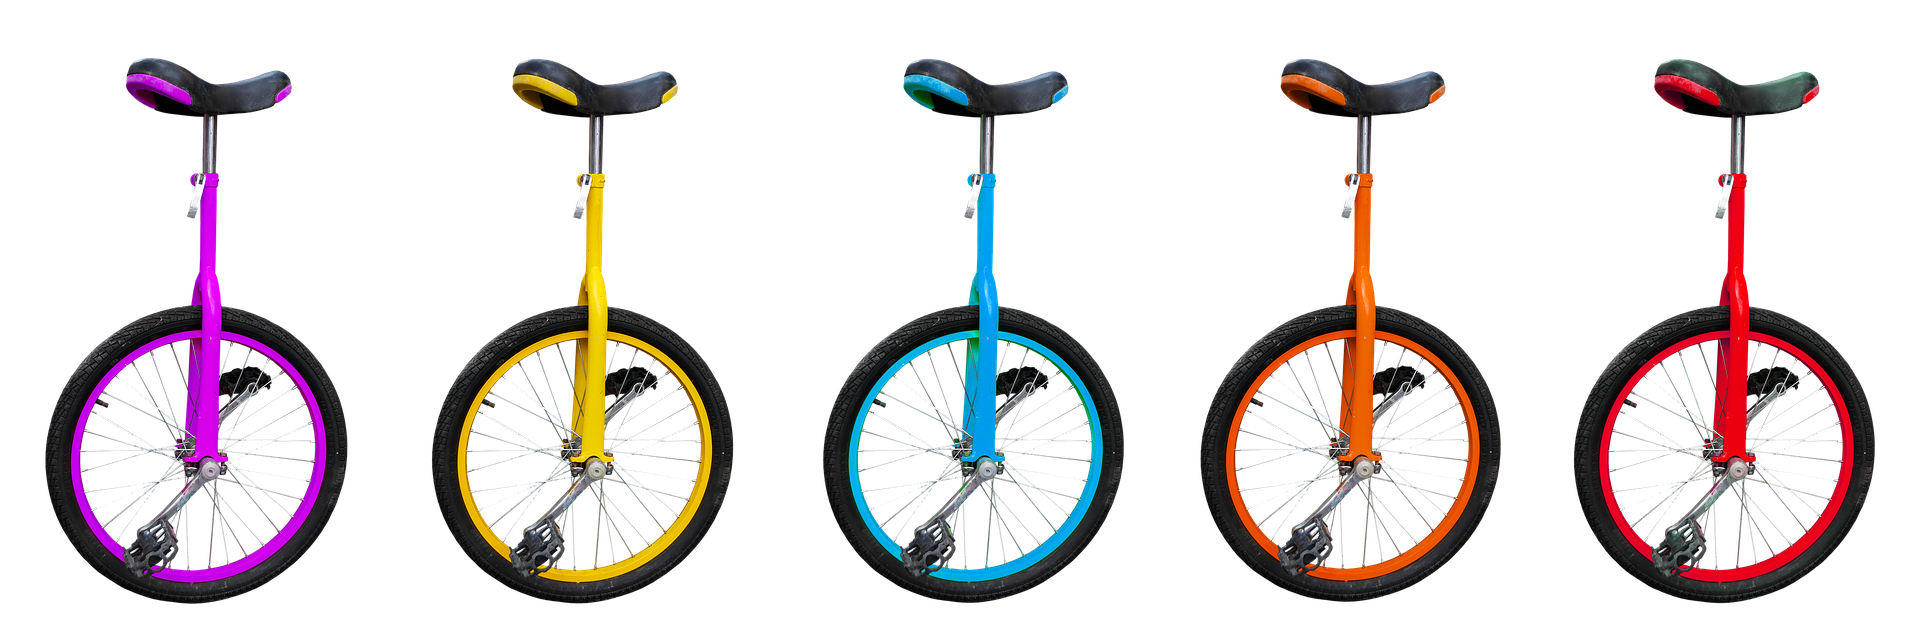 Five brightly colored unicycles